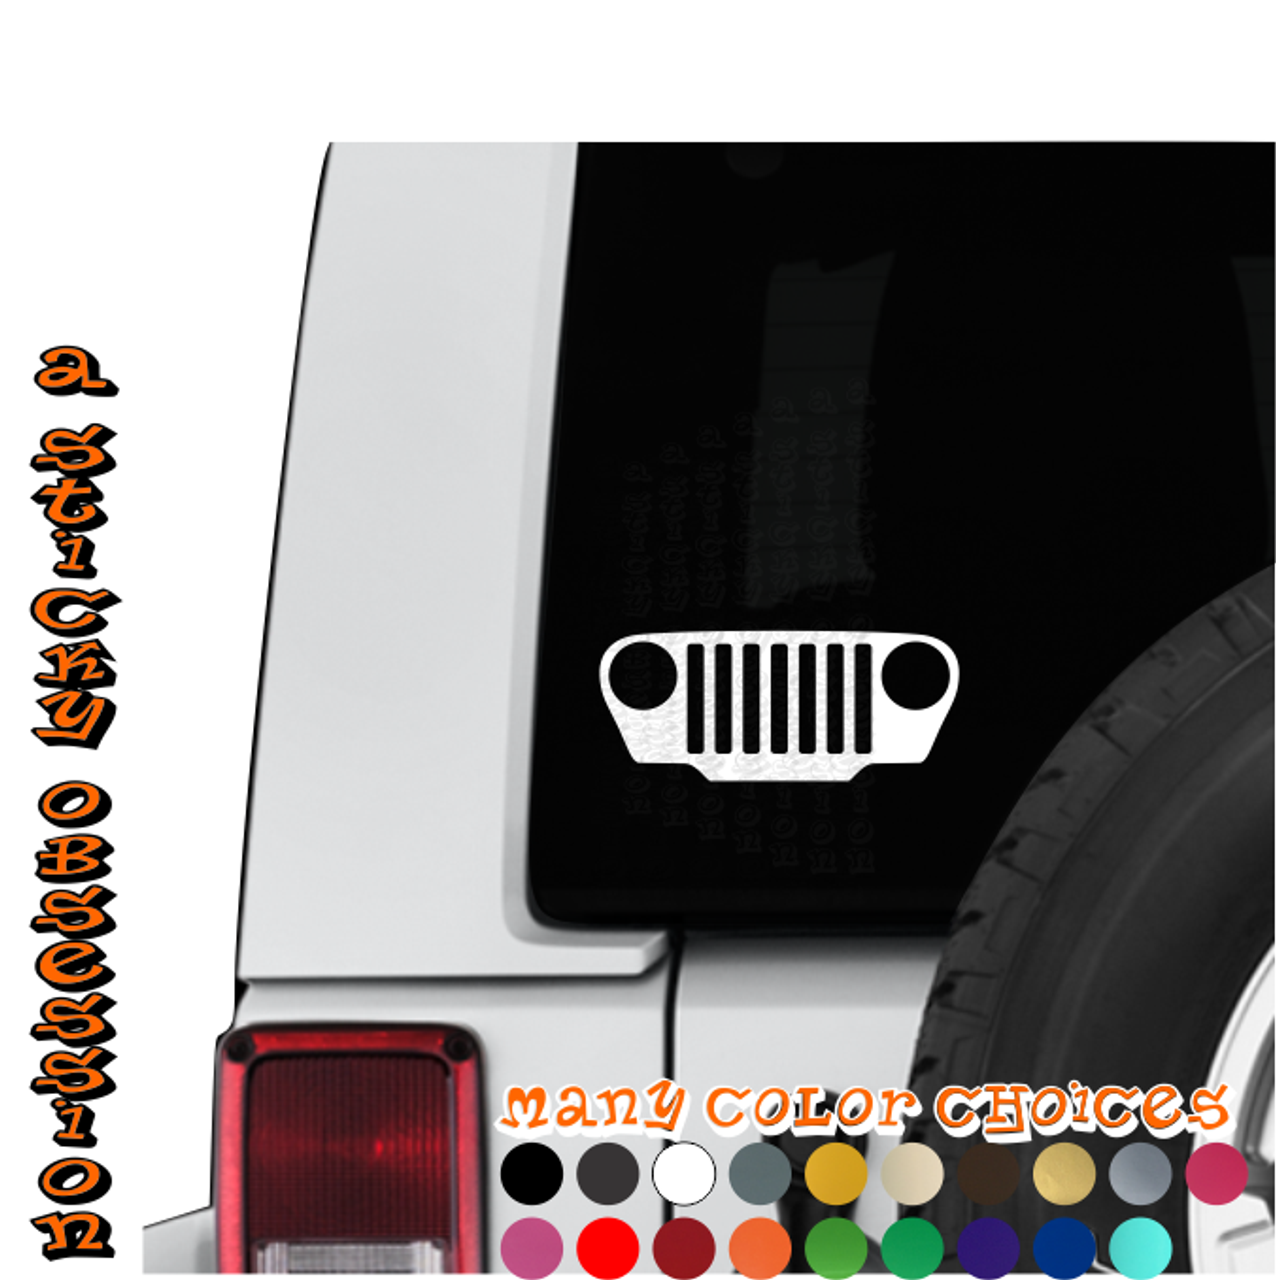 Jeep Wrangler TJ Grill Decal Sticker - A Sticky Obsession